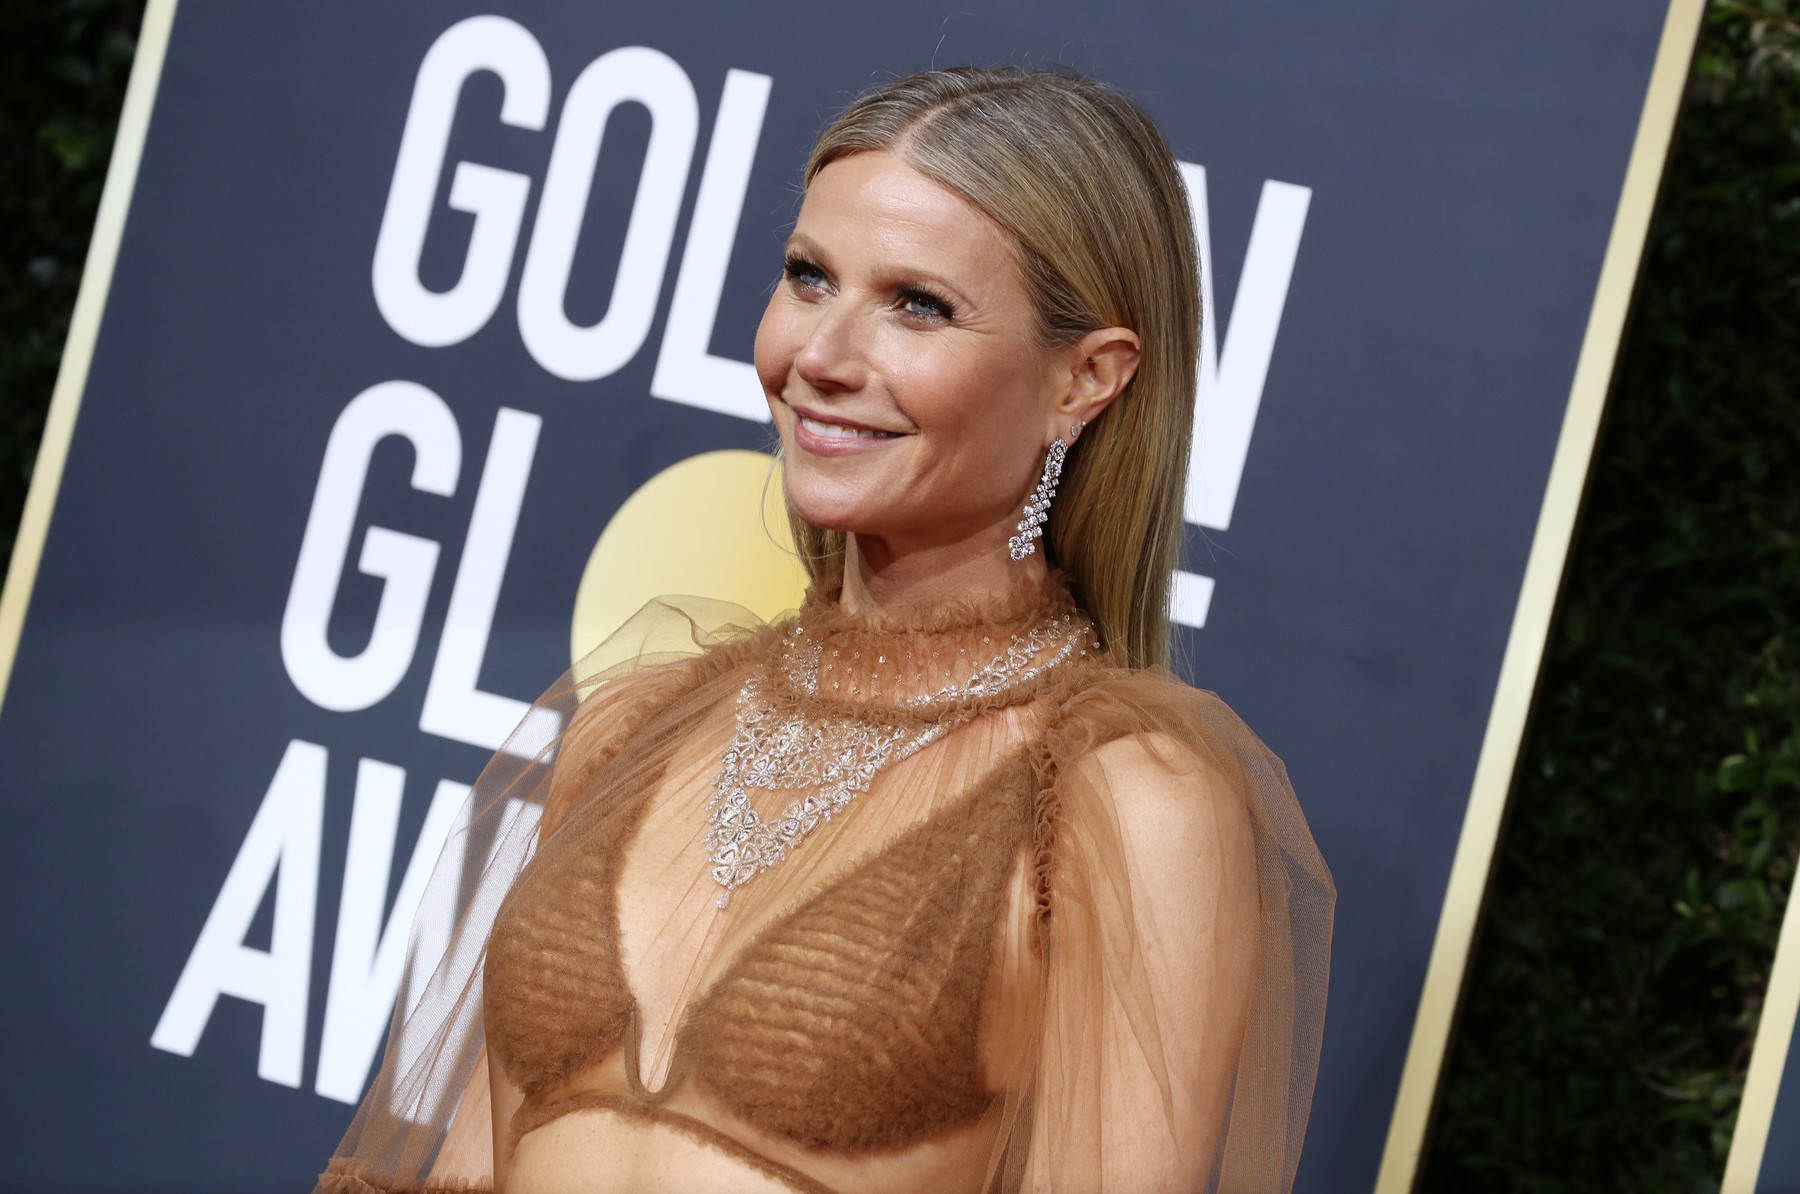 Gwyneth Paltrow
77th Annual Golden Globe Awards, Arrivals, Los Angeles, USA - 05 Jan 2020, Image: 491266893, License: Rights-managed, Restrictions: , Model Release: no, Credit line: REX / Shutterstock Editorial / Profimedia